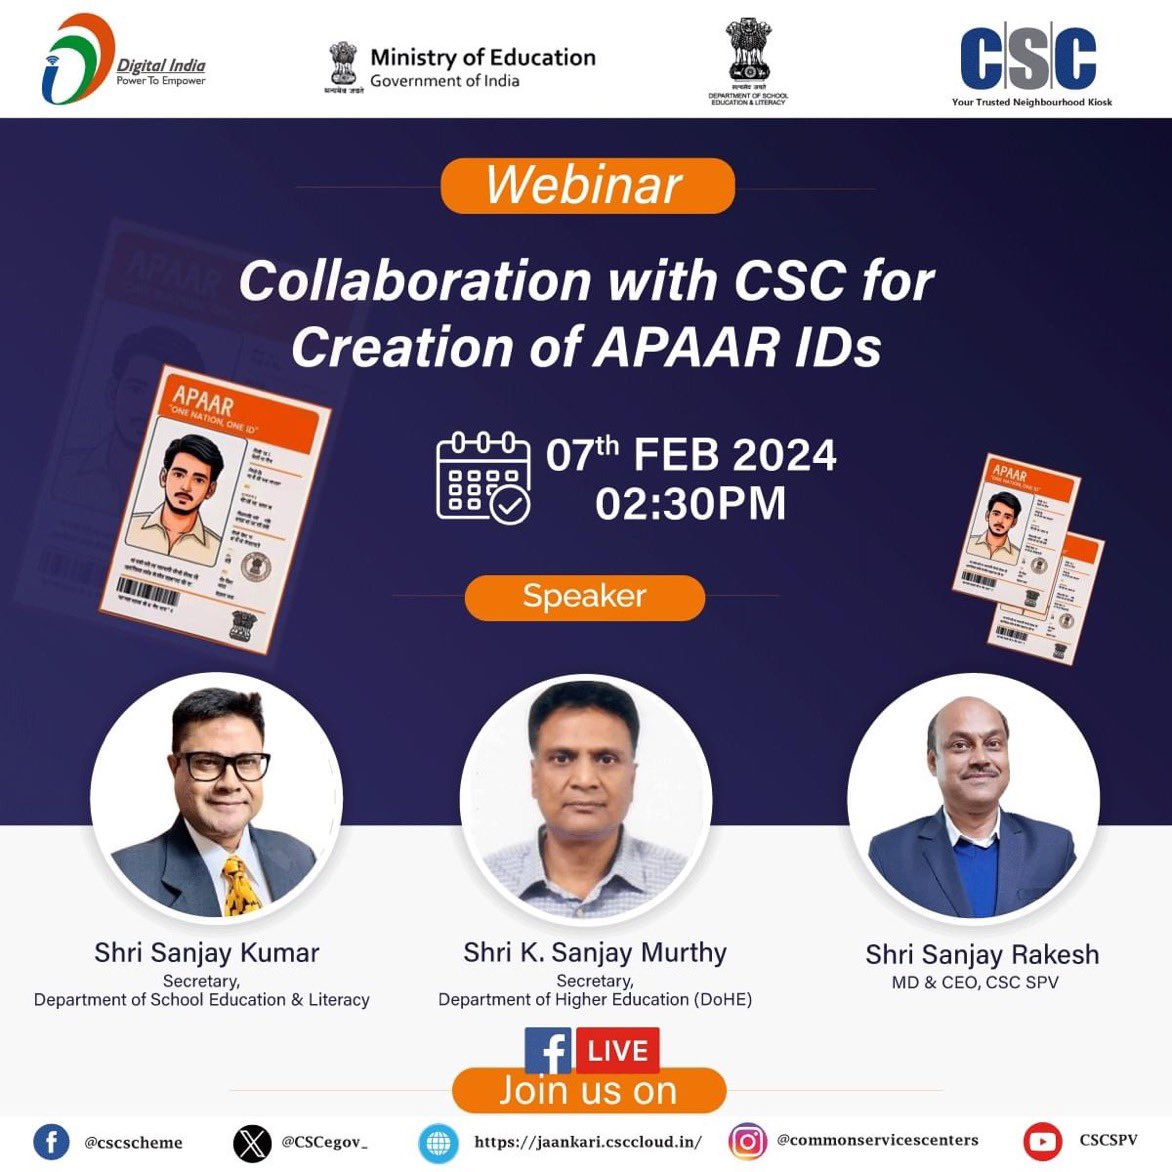 Webinar Collaborations with CSC for the Creation of #APAAR IDs... In the Presence of Sh K. Sanjay Murthy, Secretary, DoHE, Sh Sanjay Kumar, Secretary, DSEL & Sh Sanjay Rakesh, MD & CEO, CSC SPV. Join us LIVE on the #CSC Facebook Page, on 7th FEB, 2024 from 2:30 PM onwards.